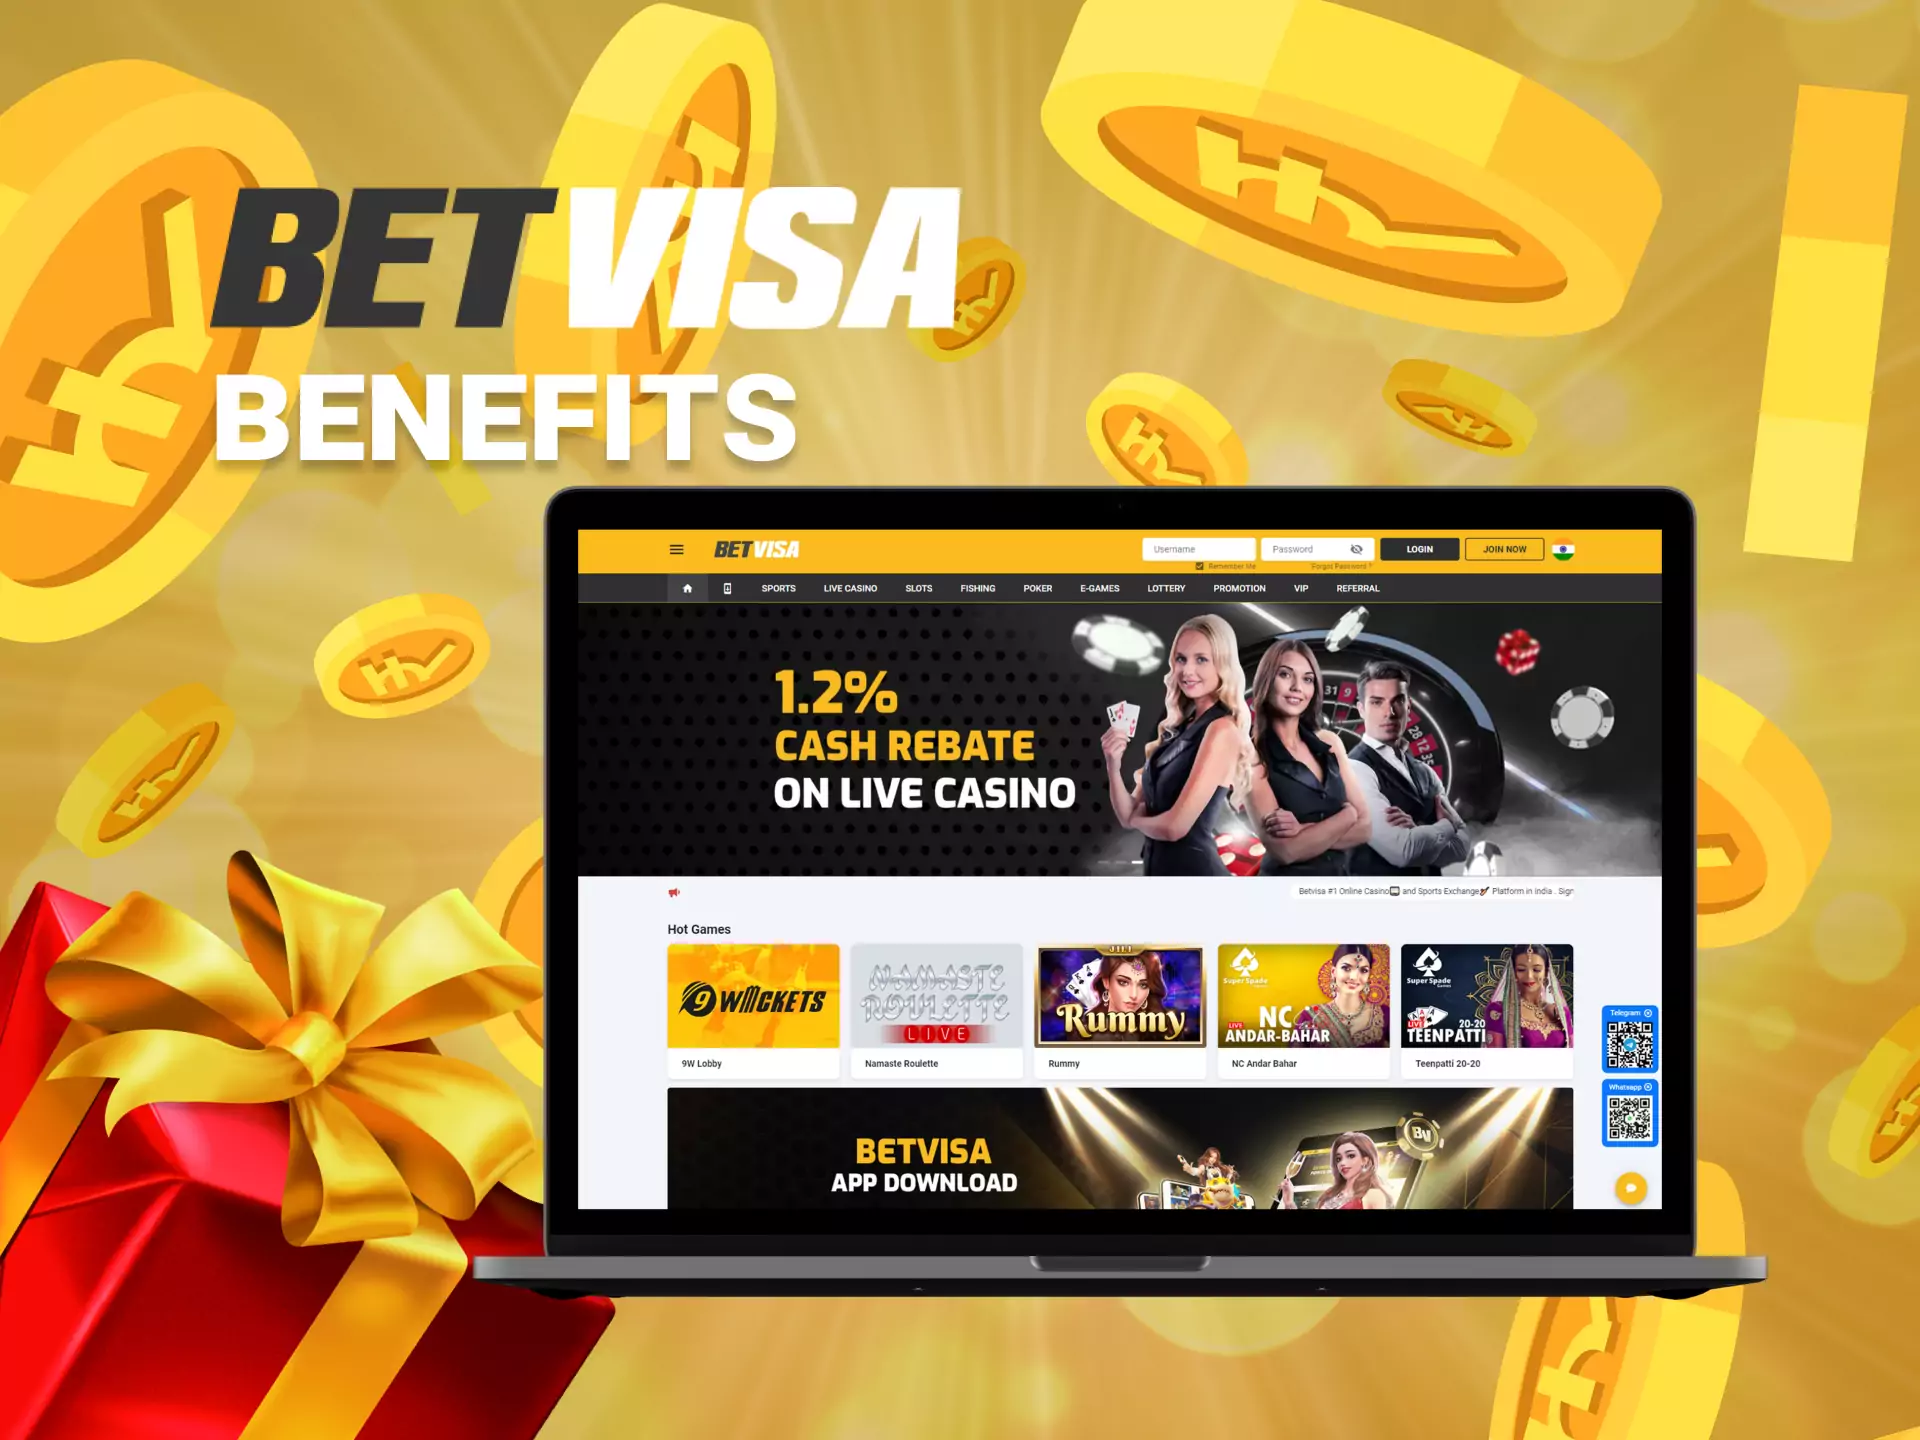 For Indian users, the main benefit of Betvisa is that it accepts rupees and Indian local payment systems.